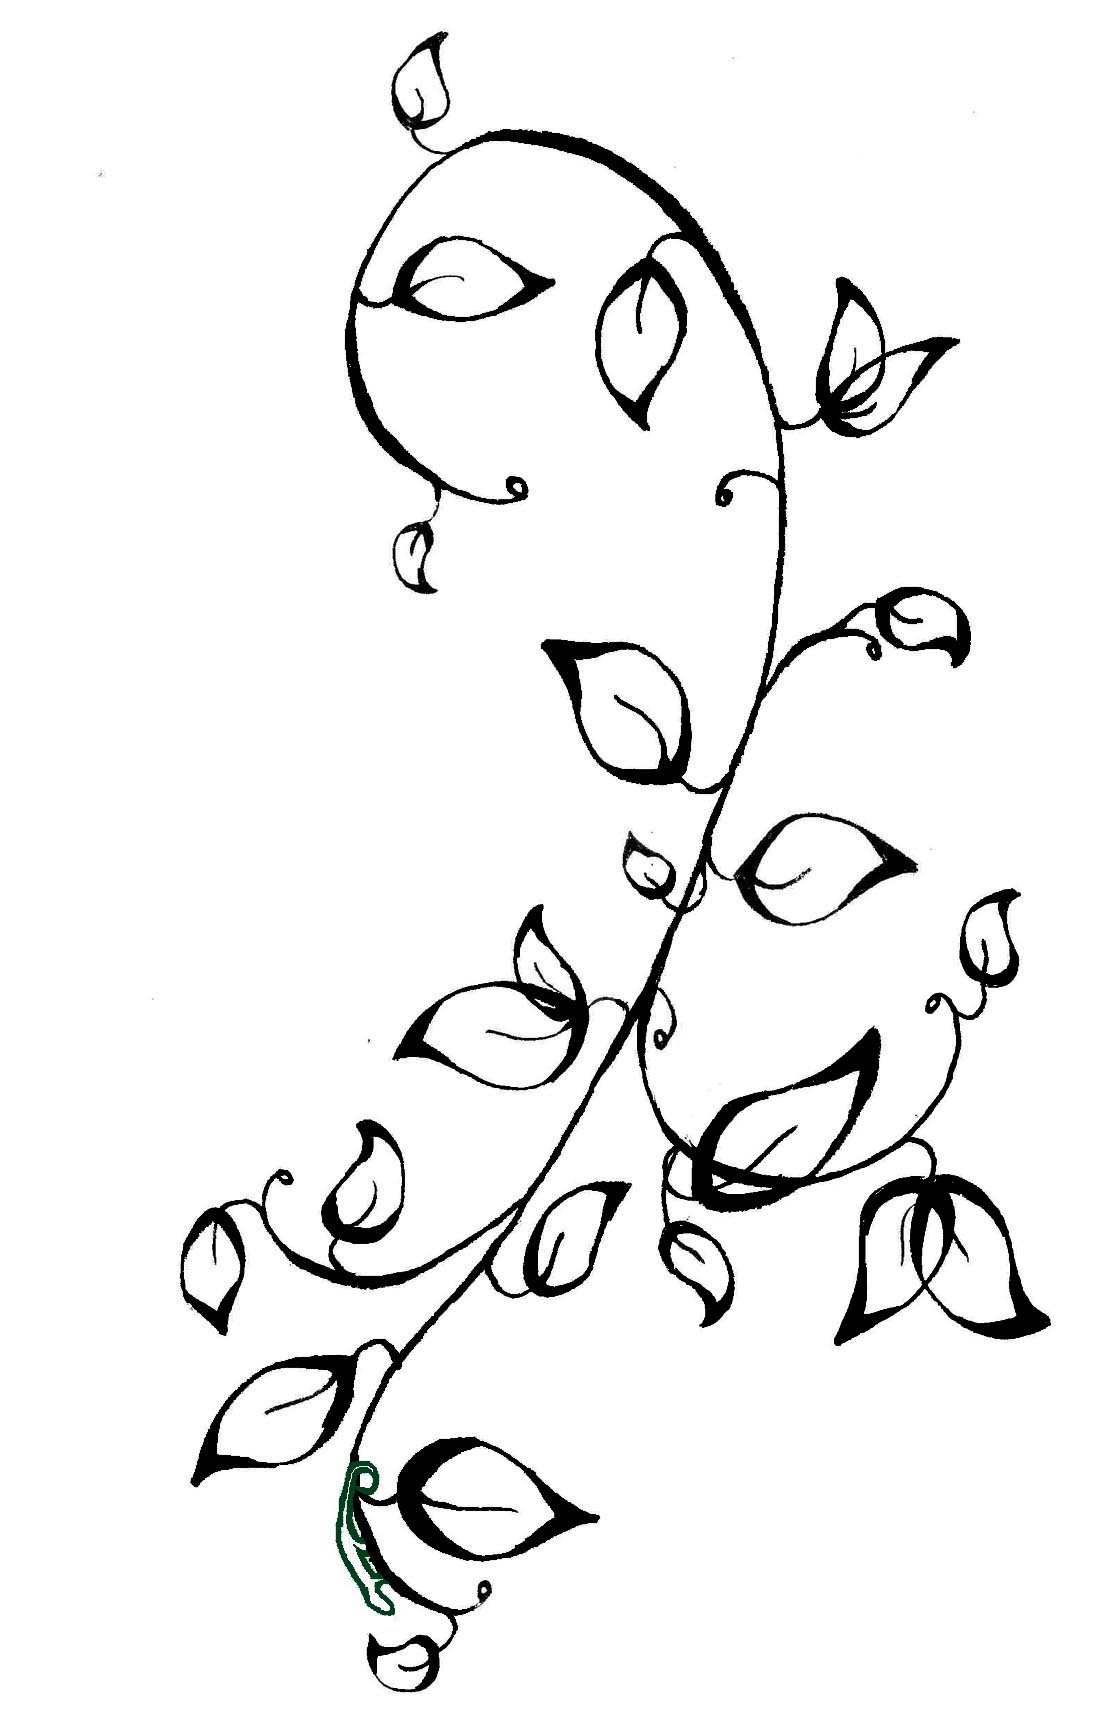 25 Flower Vine Drawings Free Cliparts That You Can Download To You